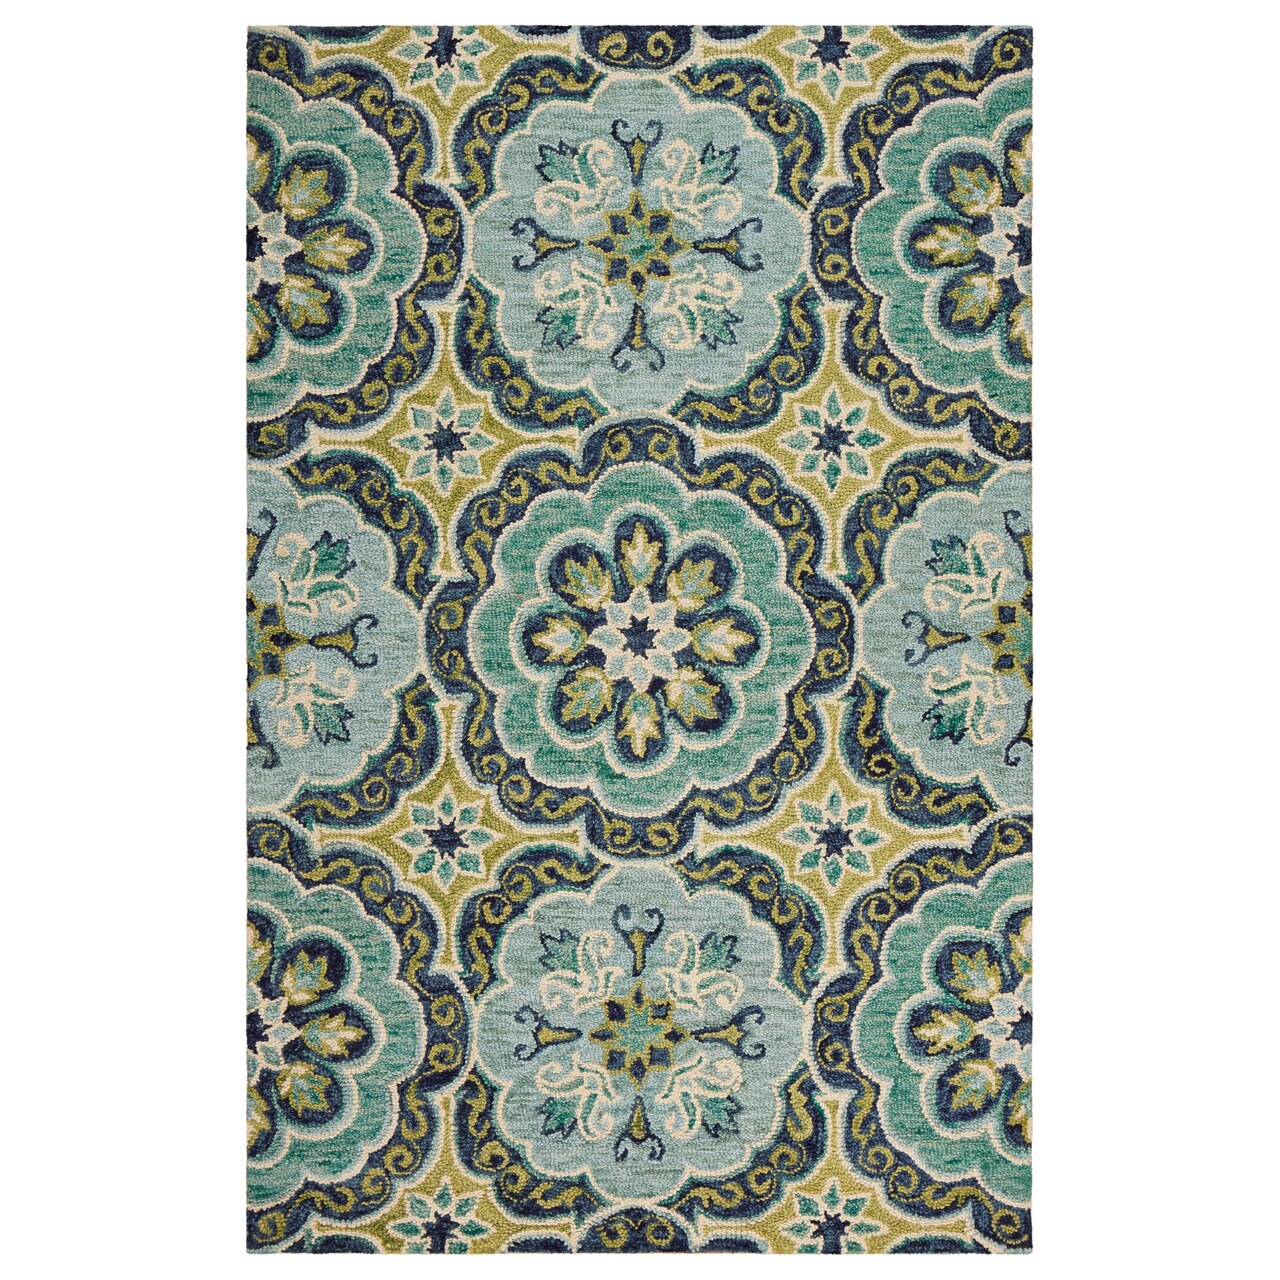 Laddha Home Designs 5&#x27; x 7.75&#x27; Green and Blue Floral Rectangular Area Throw Rug